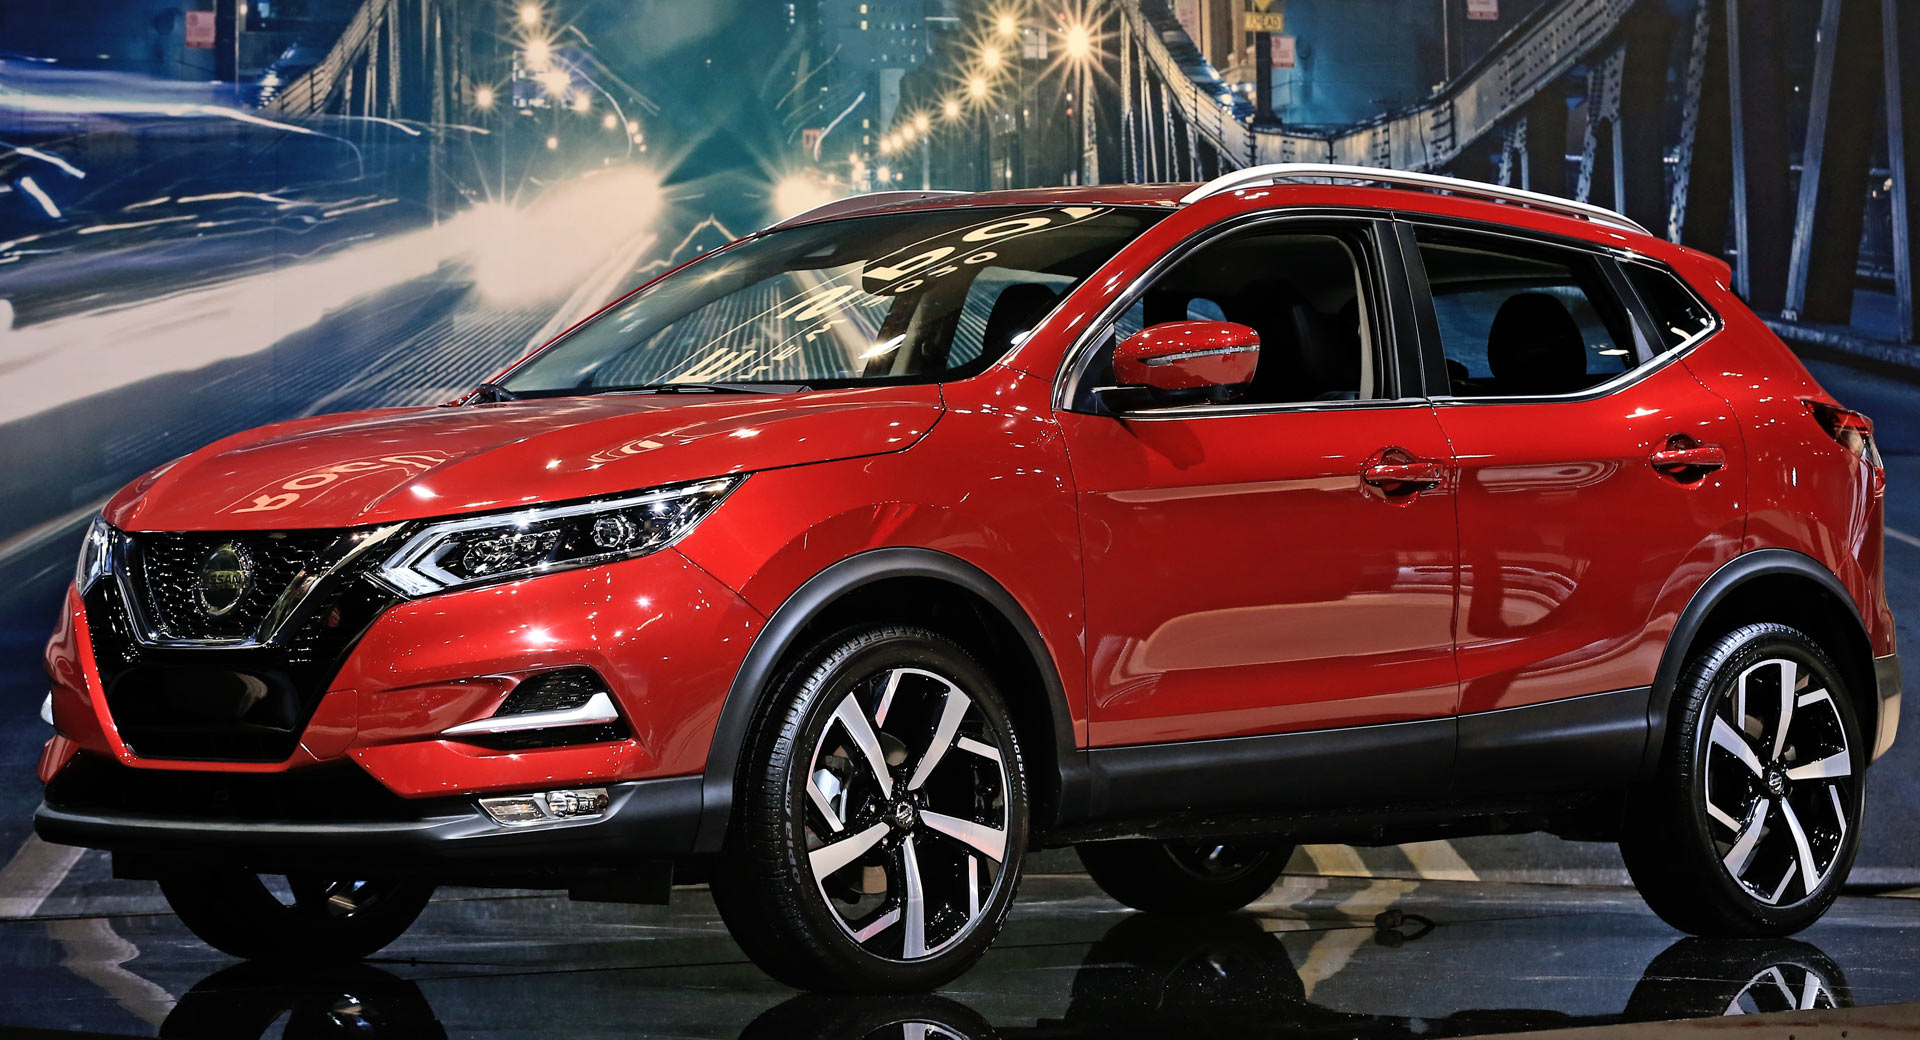 2020 Nissan Rogue Sport Facelift Boasts New Styling And Standard Safety ...